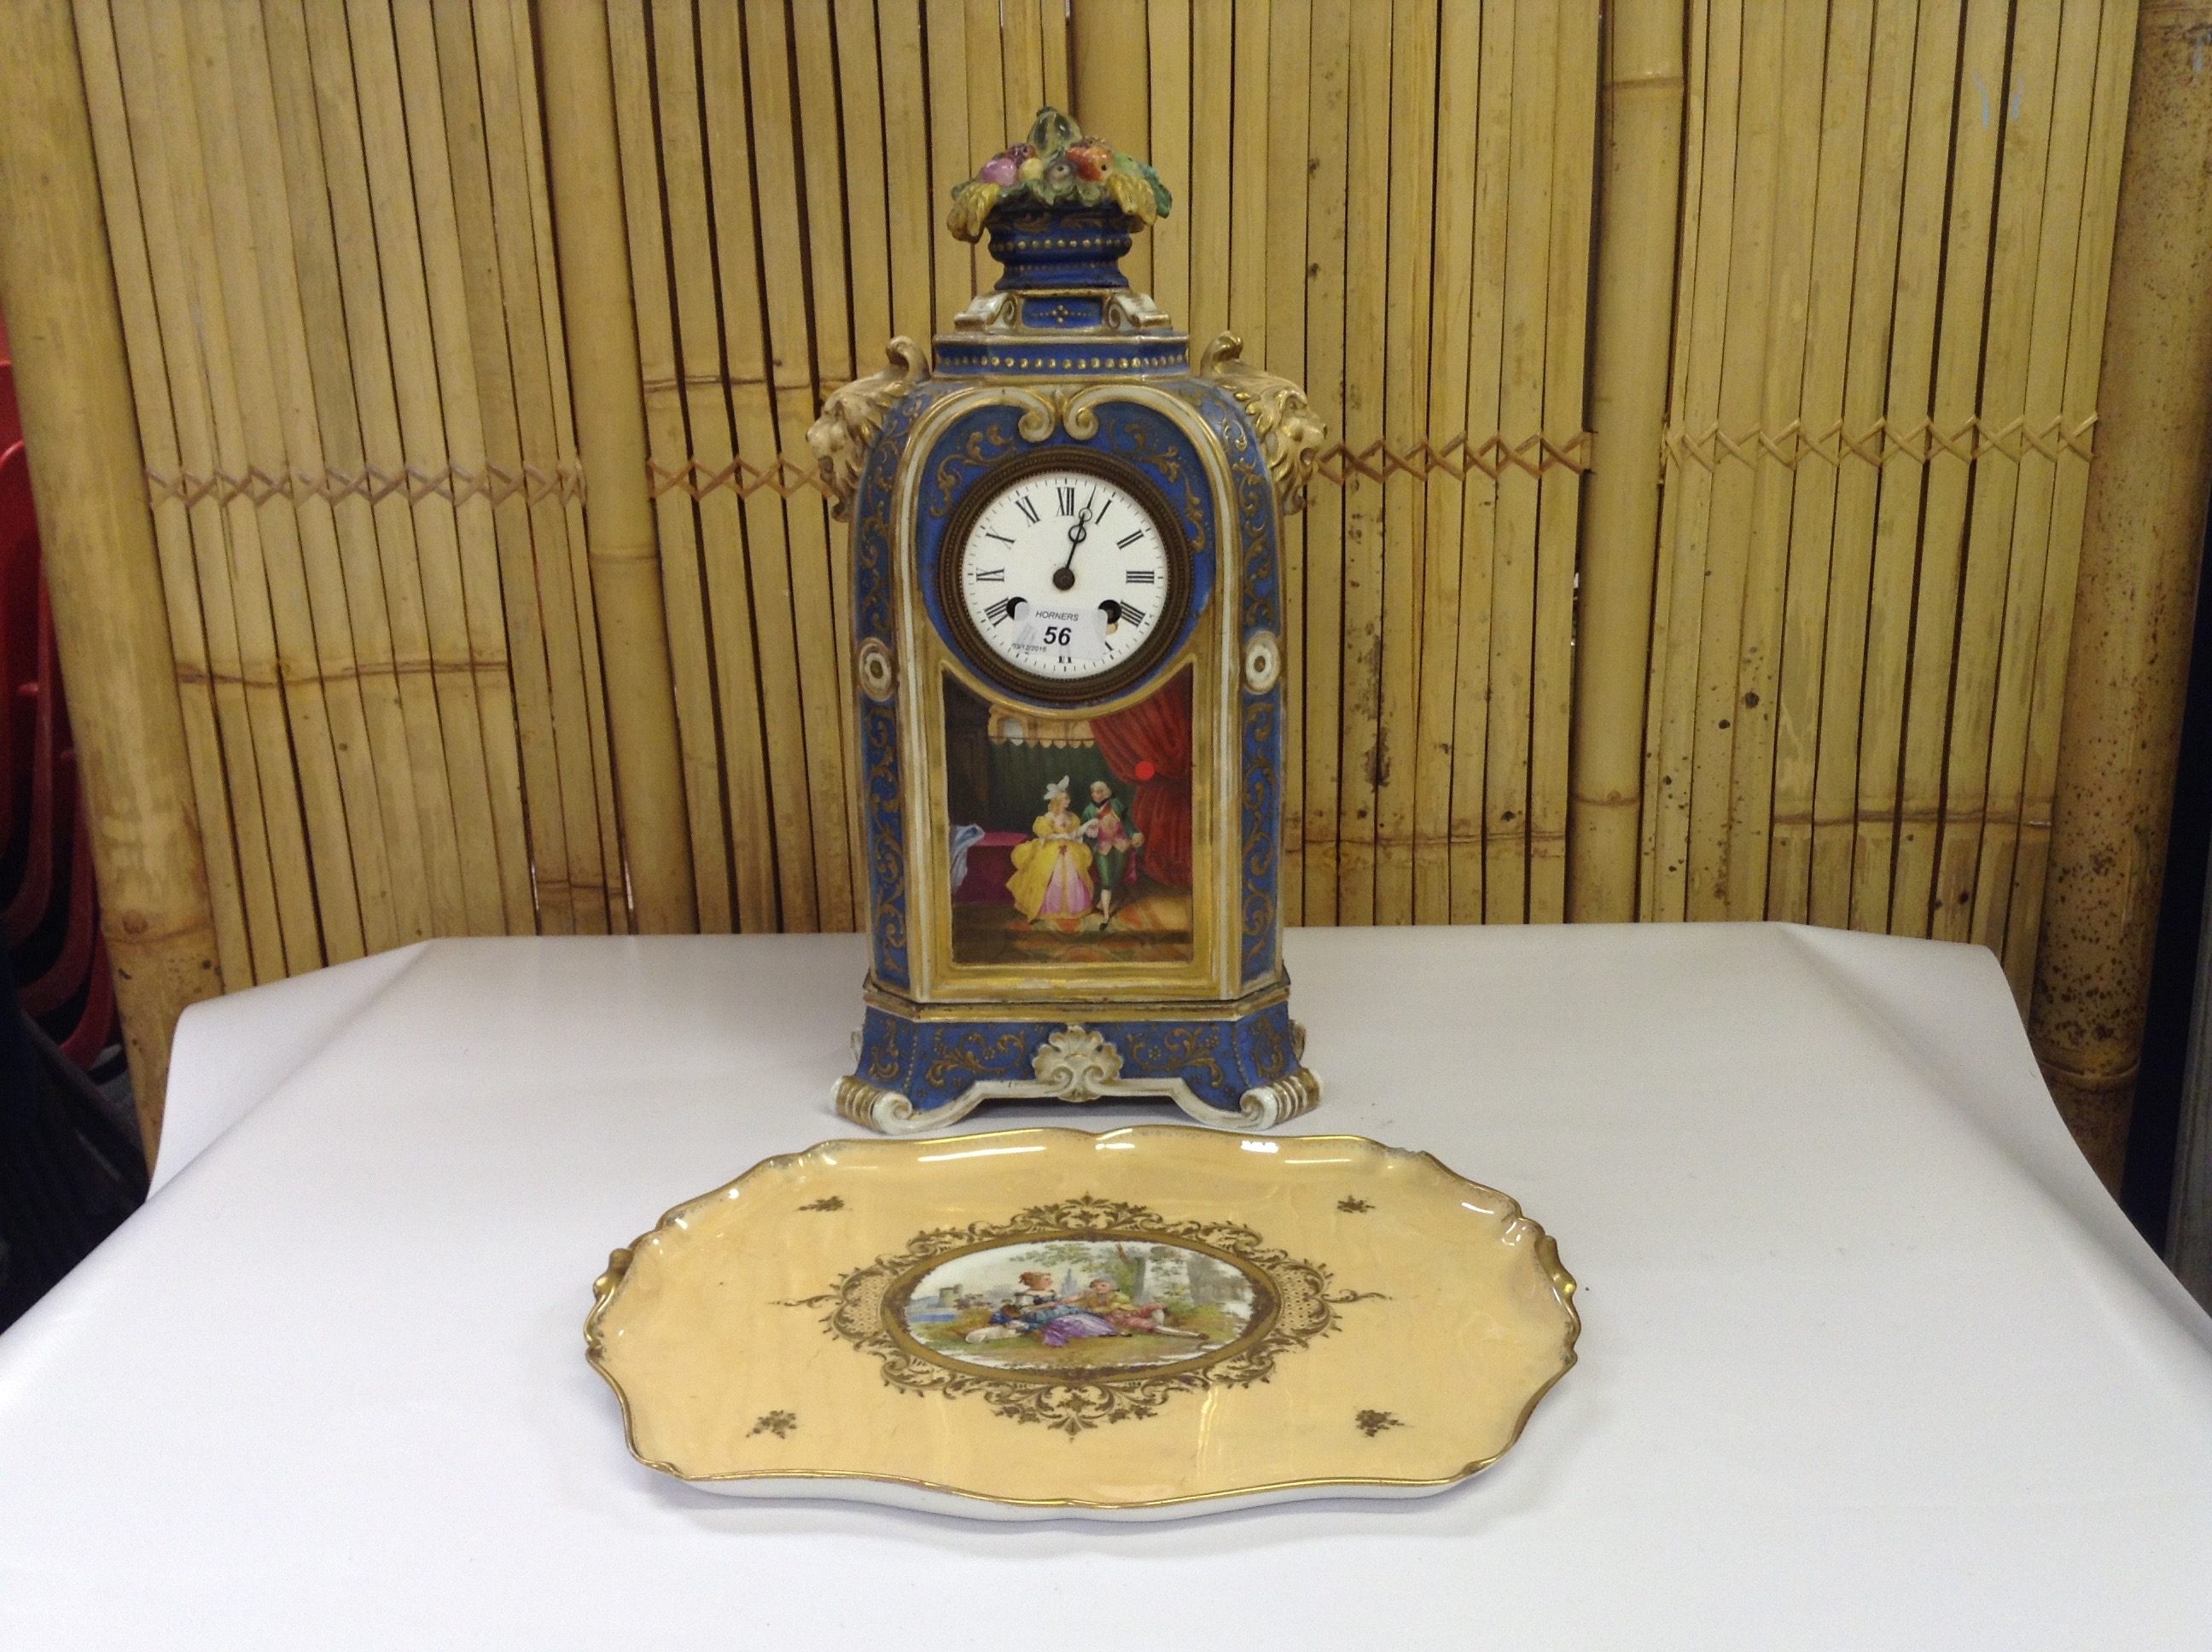 CONTINENTAL CHINA MANTLE CLOCK PAINTED WITH CLASSICAL SCENES ALONG WITH A DRESDEN PORCELAIN TRAY